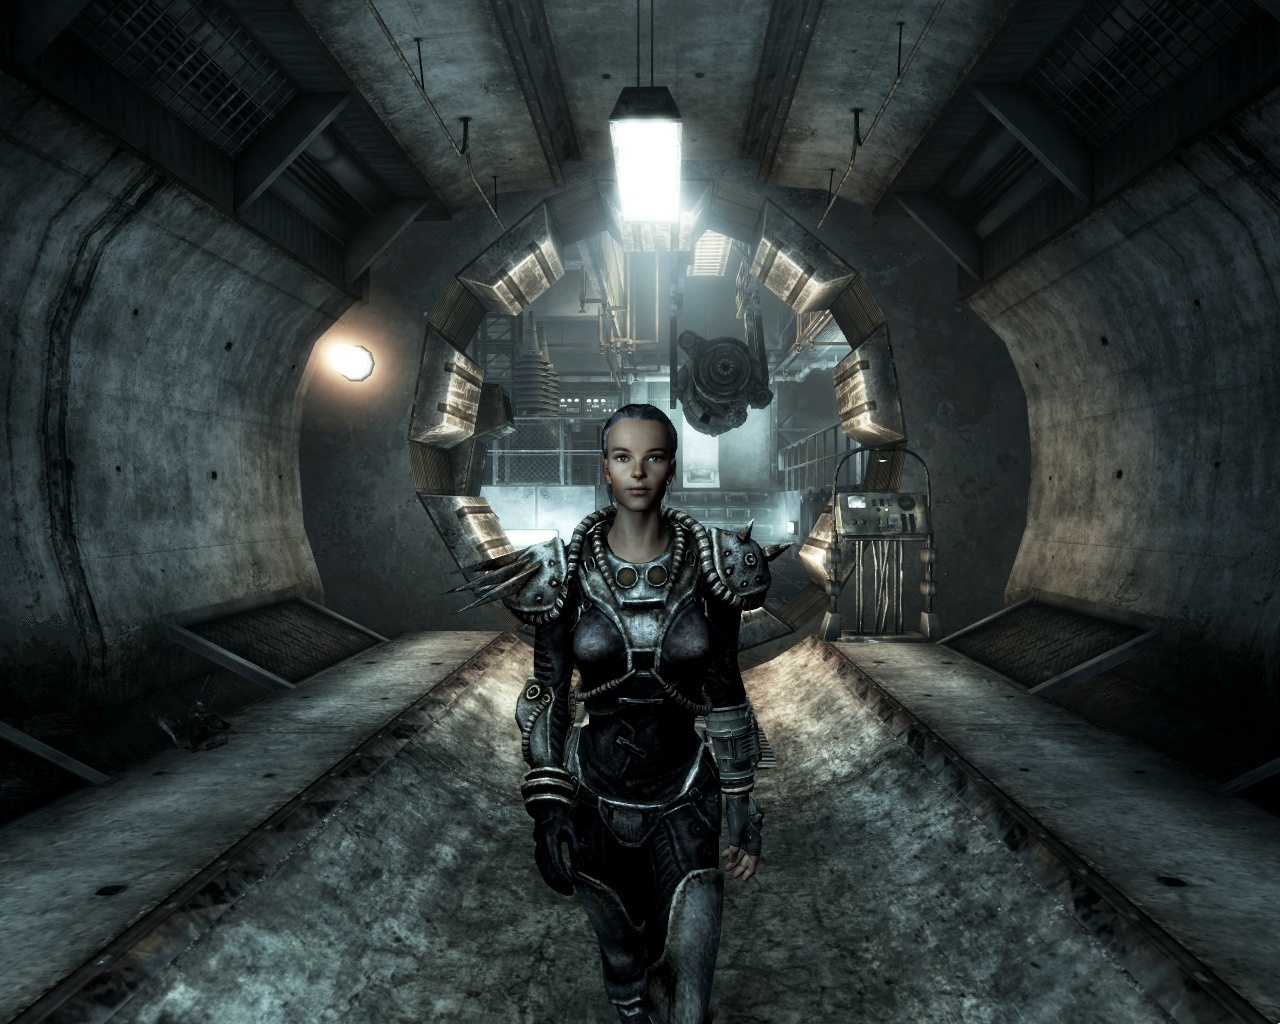 Русификатор fallout 3 steam